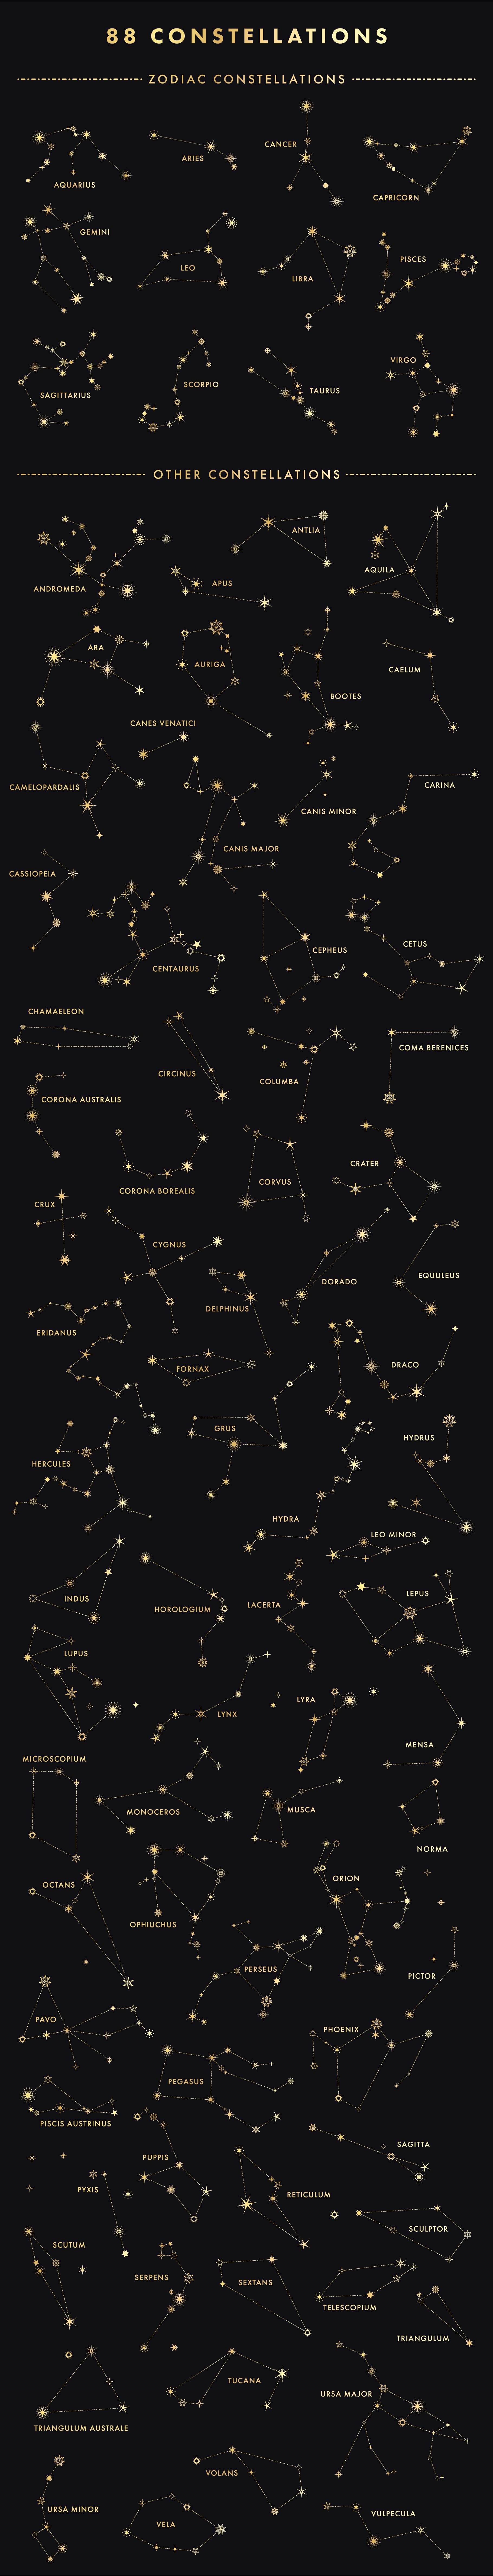 88 star constellations by megs lang prvw 010 369